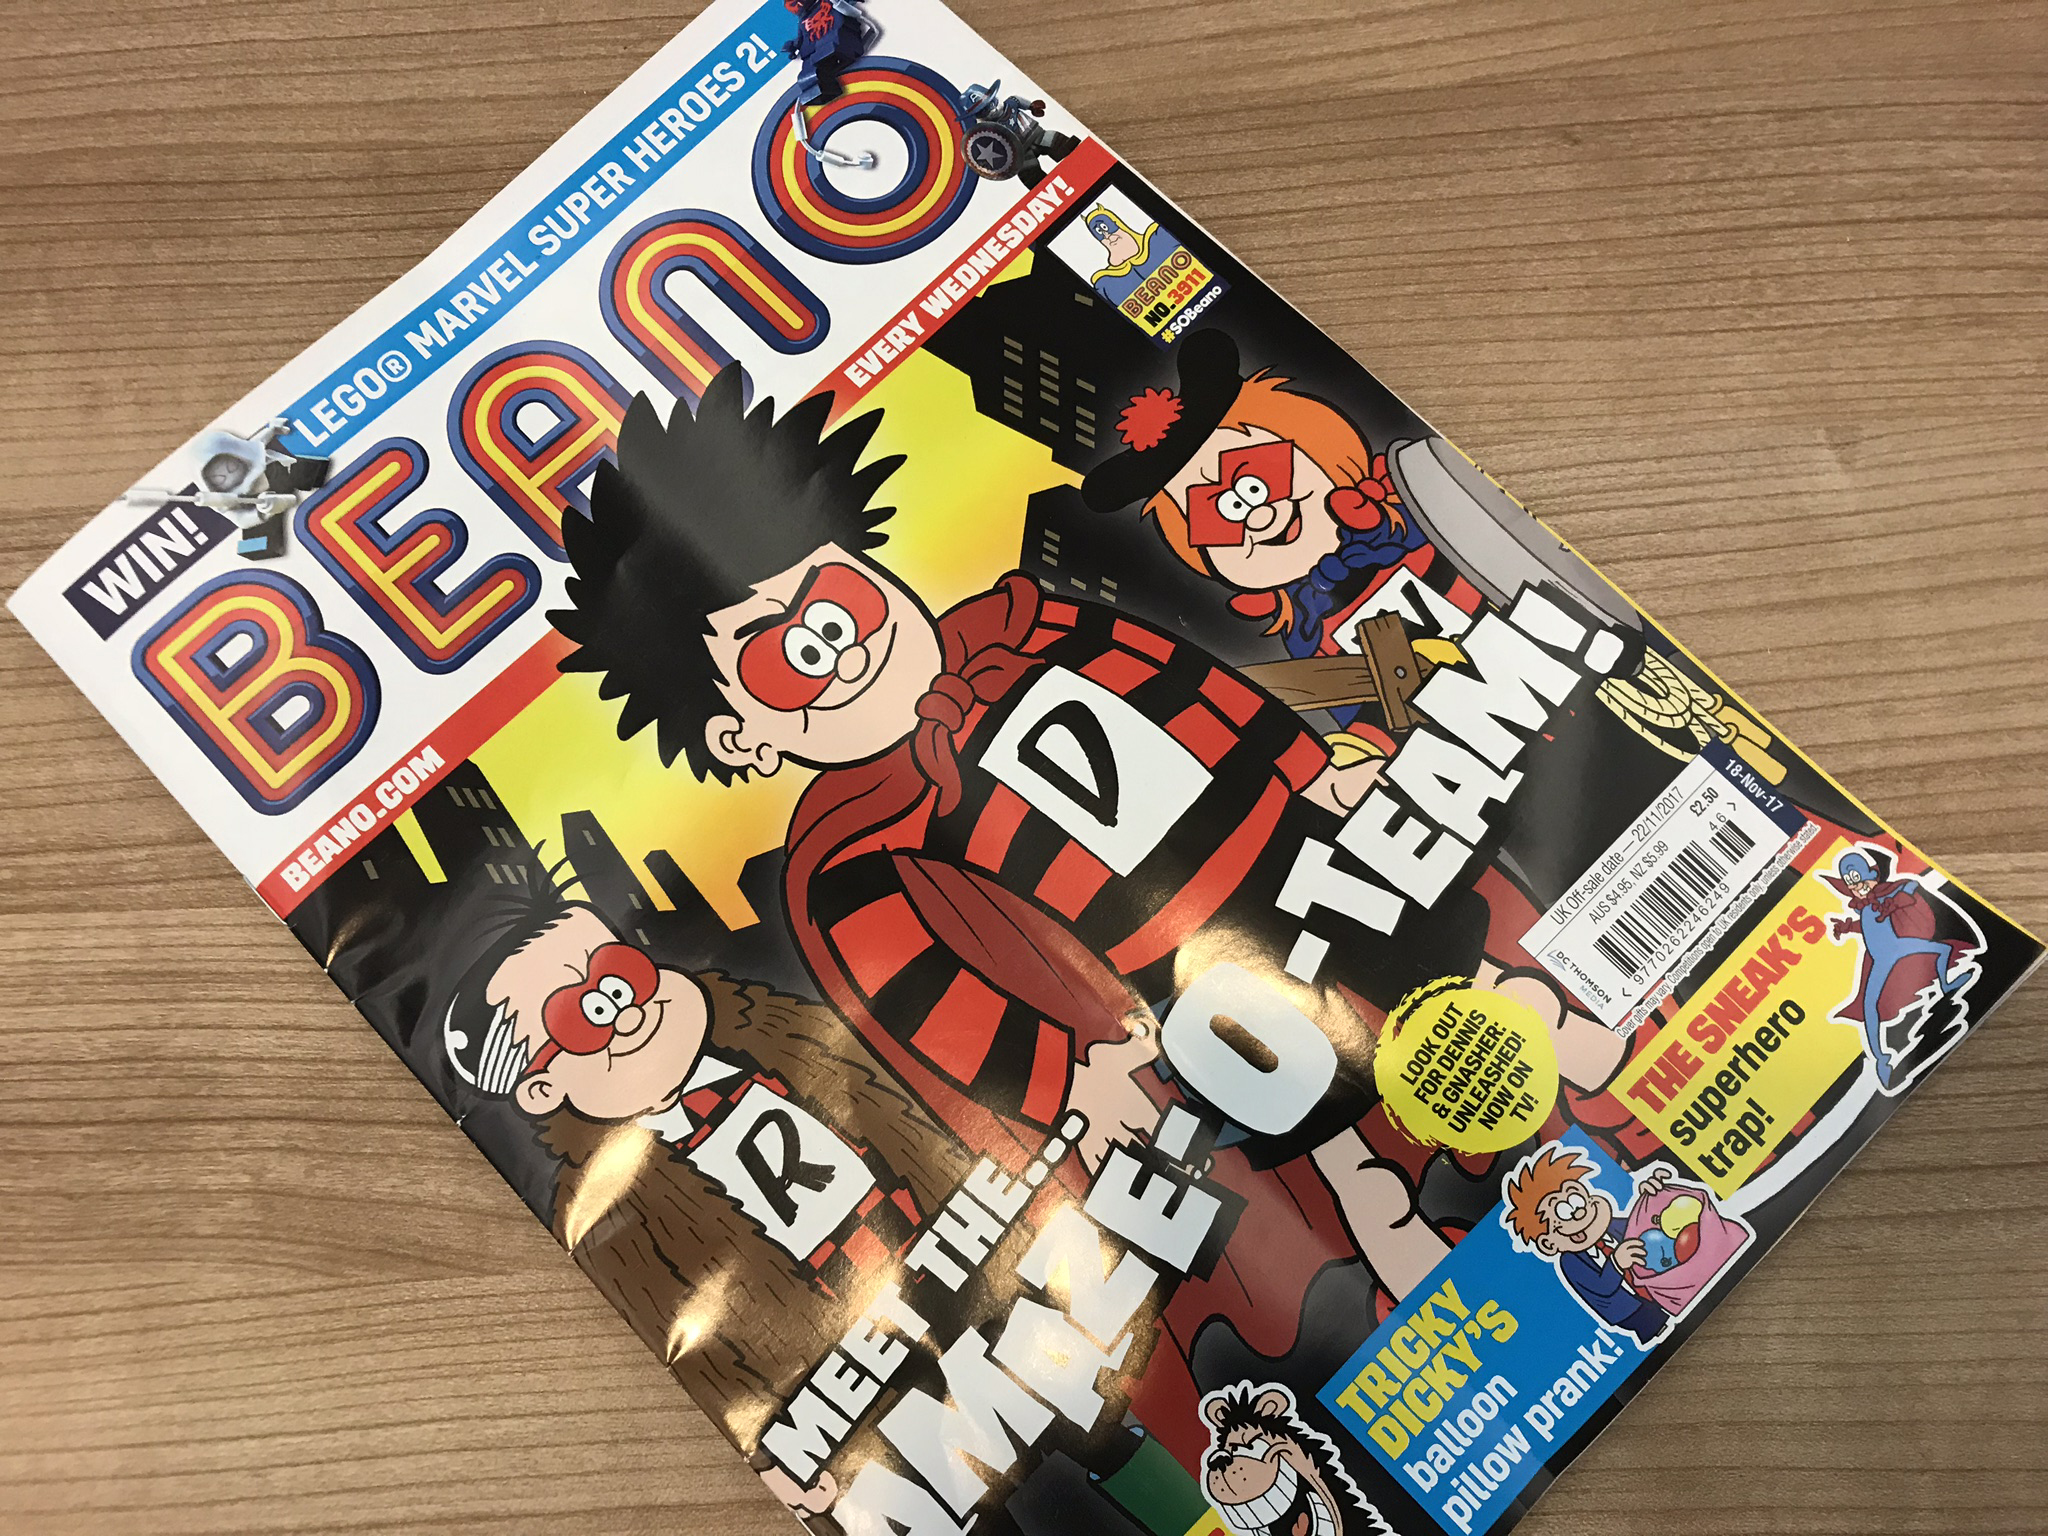 A copy of the Beano